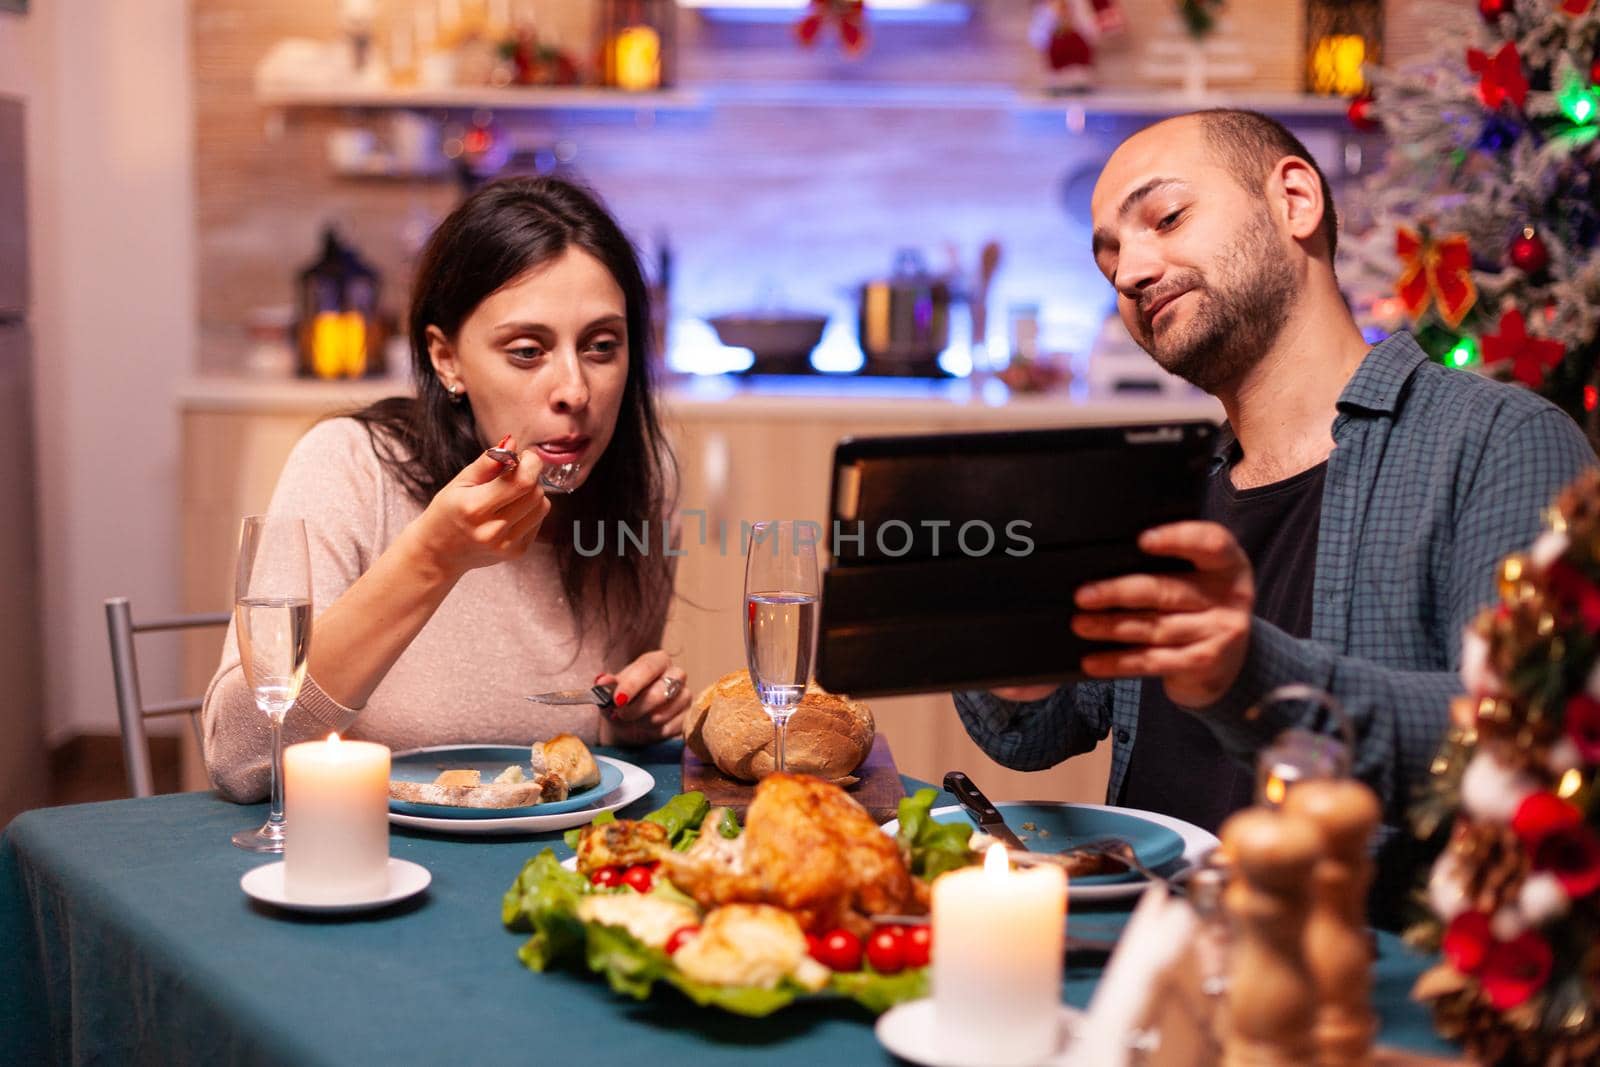 Joyful couple eating delicious dinner sitting at table in xmas decorated kitchen celebrating christmas holiday. Family watching entertainment movie enjoying winter time together. Santa-claus season